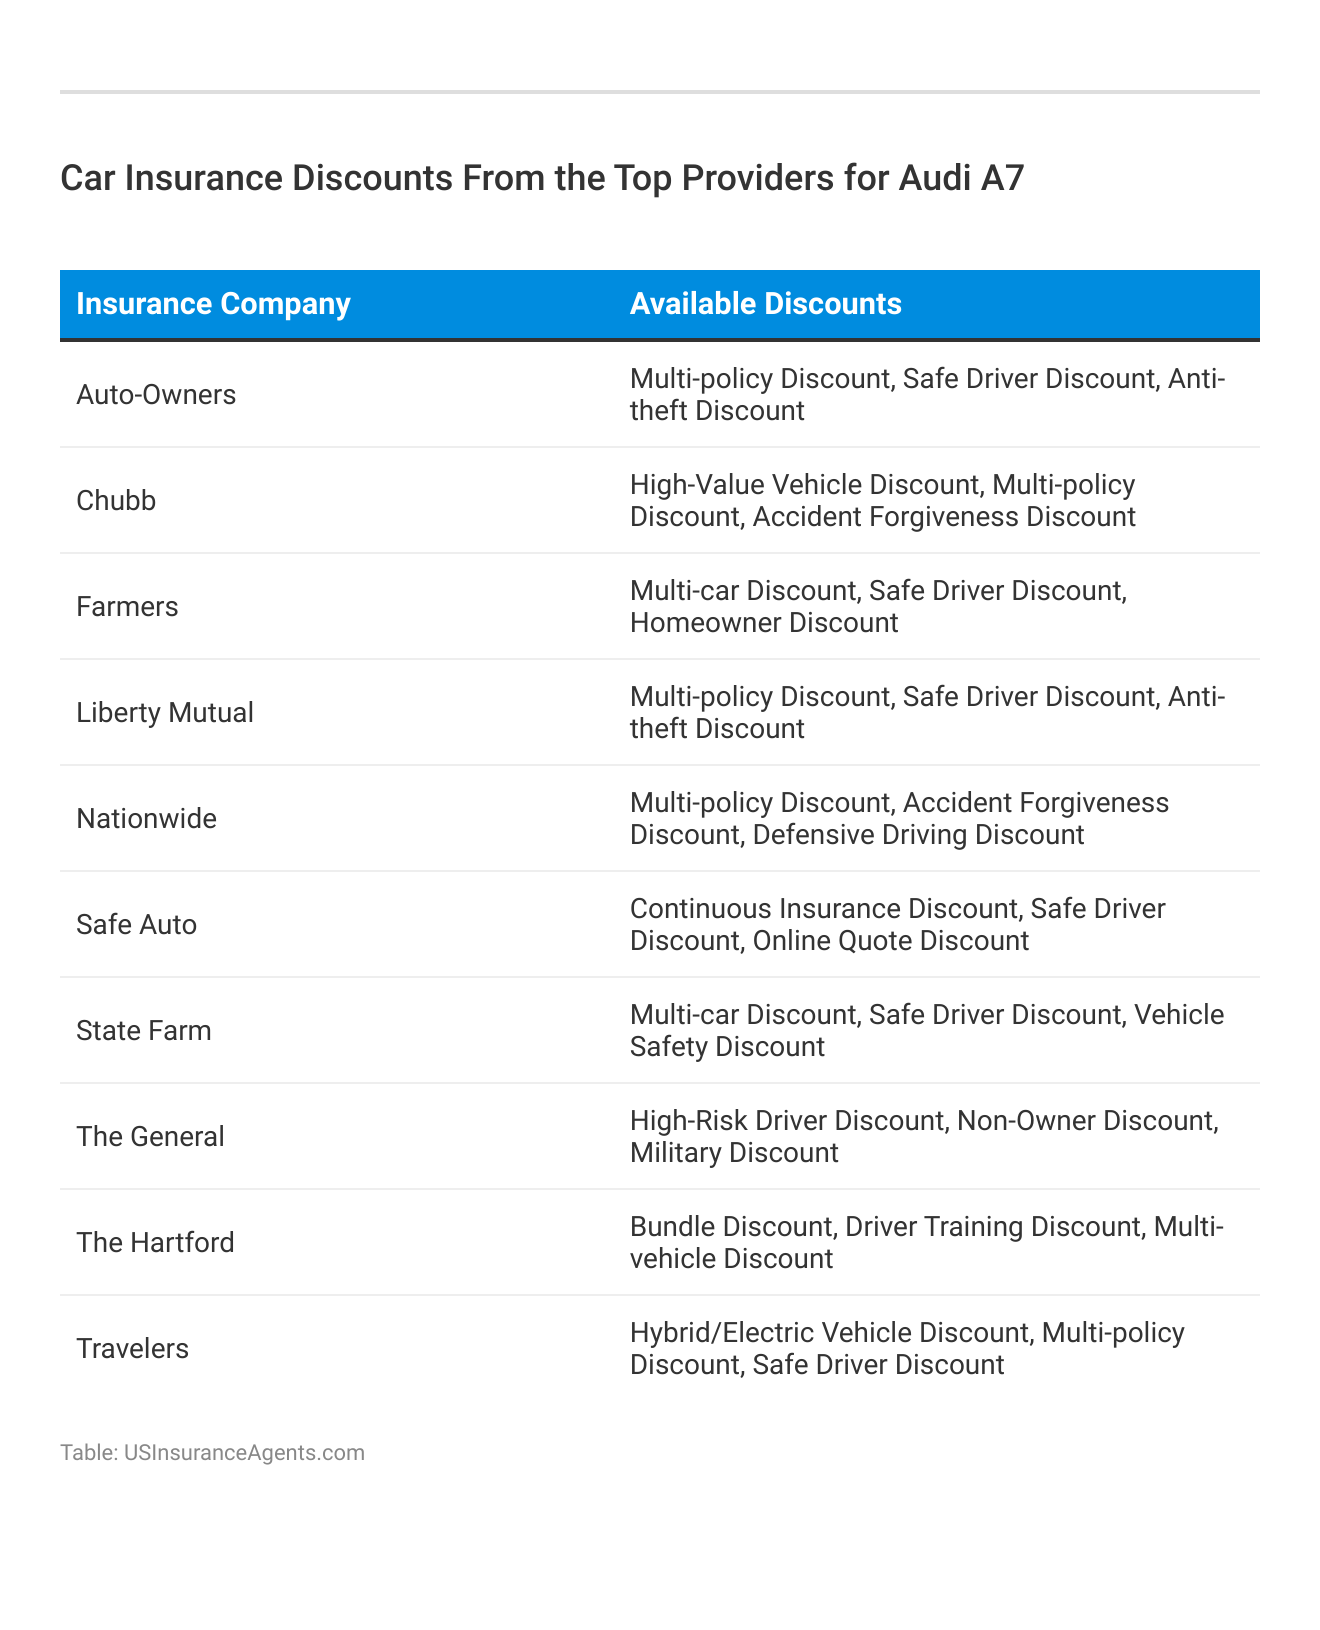 <h3>Car Insurance Discounts From the Top Providers for Audi A7</h3>